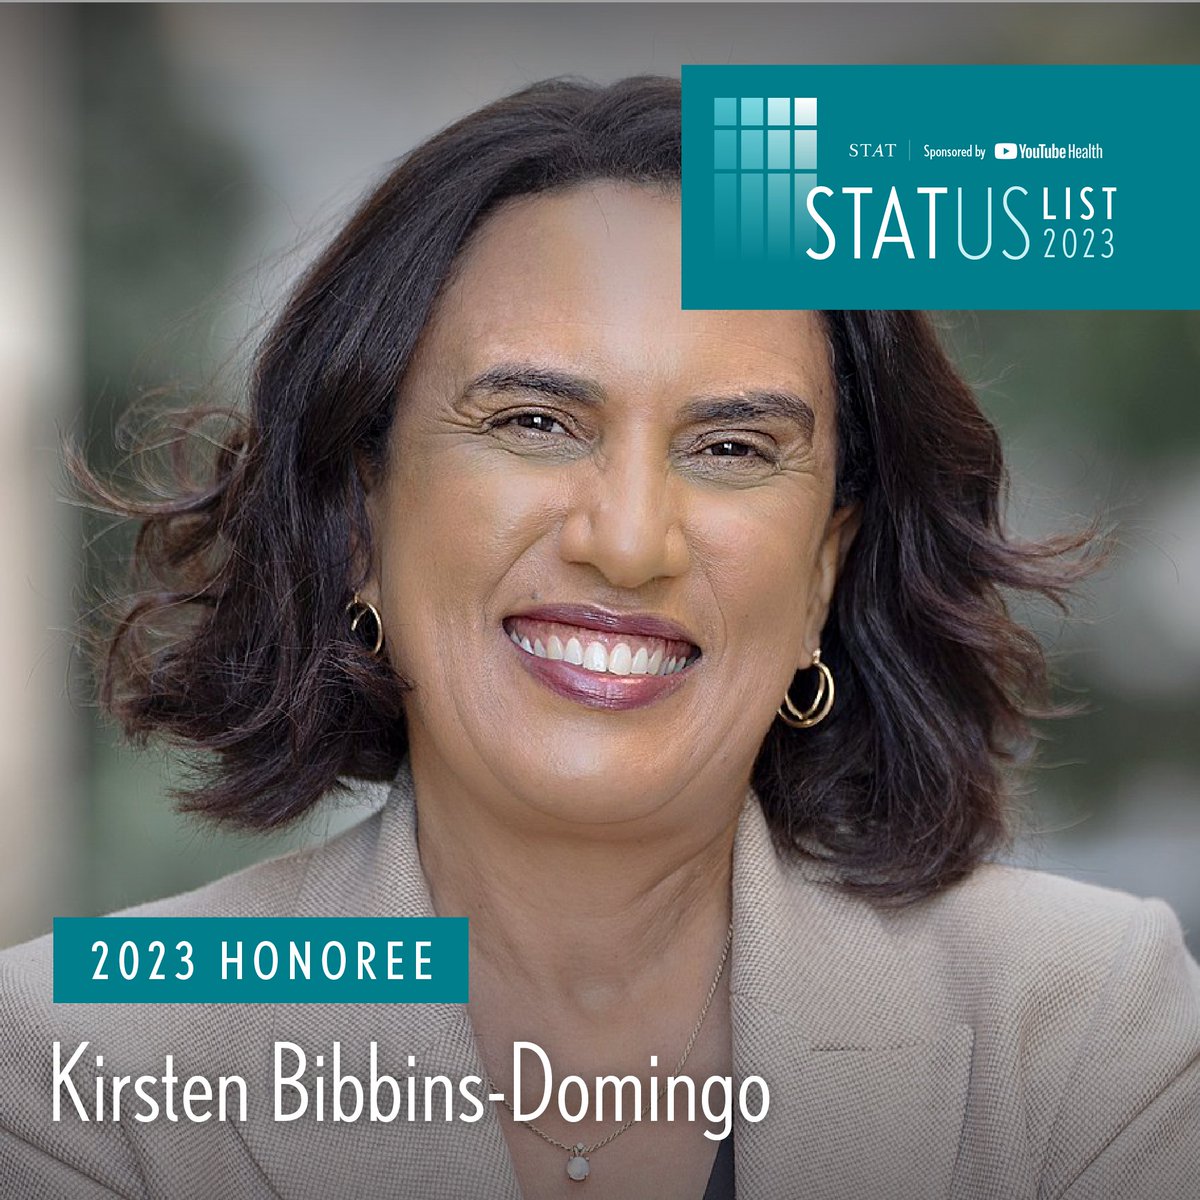 Congratulations to JAMA Editor in Chief @KBibbinsDomingo, who has been selected by @statnews as one of this year's #STATUSList honorees, to recognize leaders in health, medicine, and science.